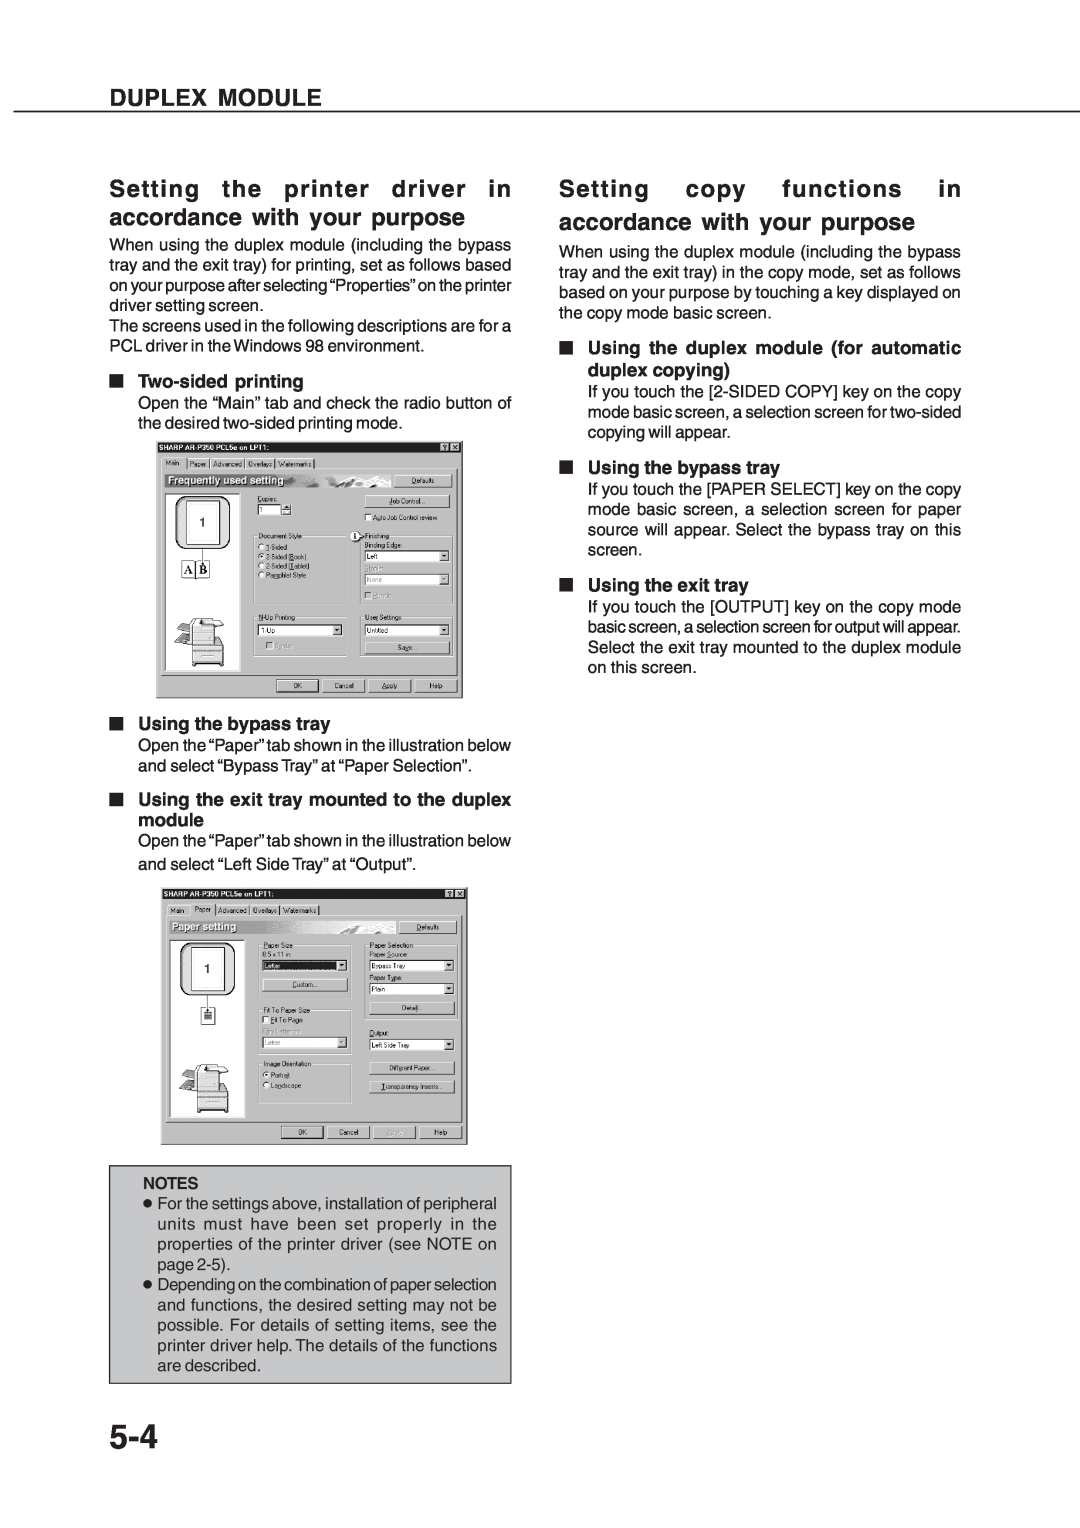 Sharp AR_M280 Setting the printer driver in accordance with your purpose, Two-sided printing, Using the bypass tray 